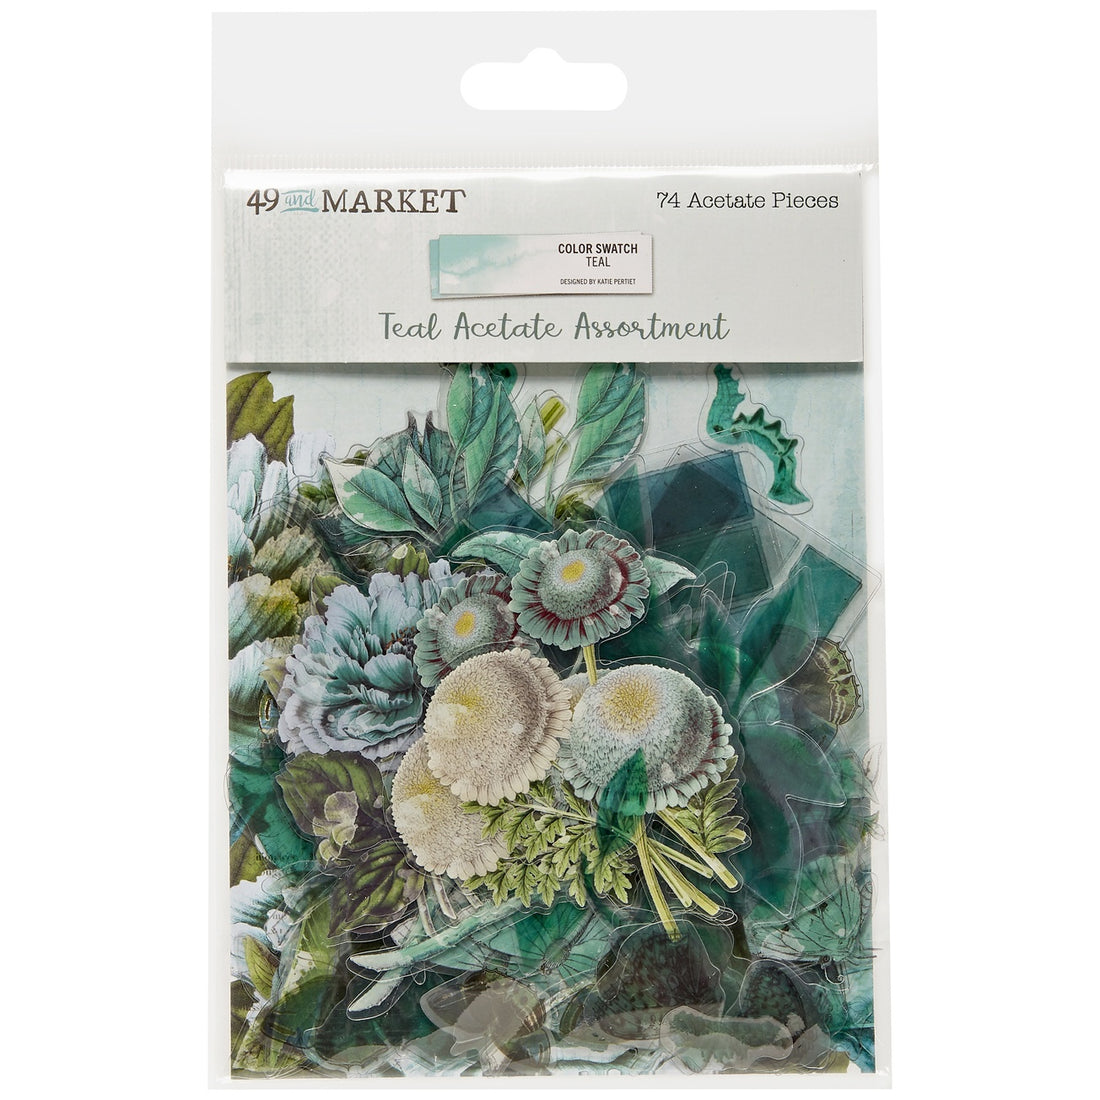 49 and Market Color Swatch TEAL ACETATE LEAVES 74pc